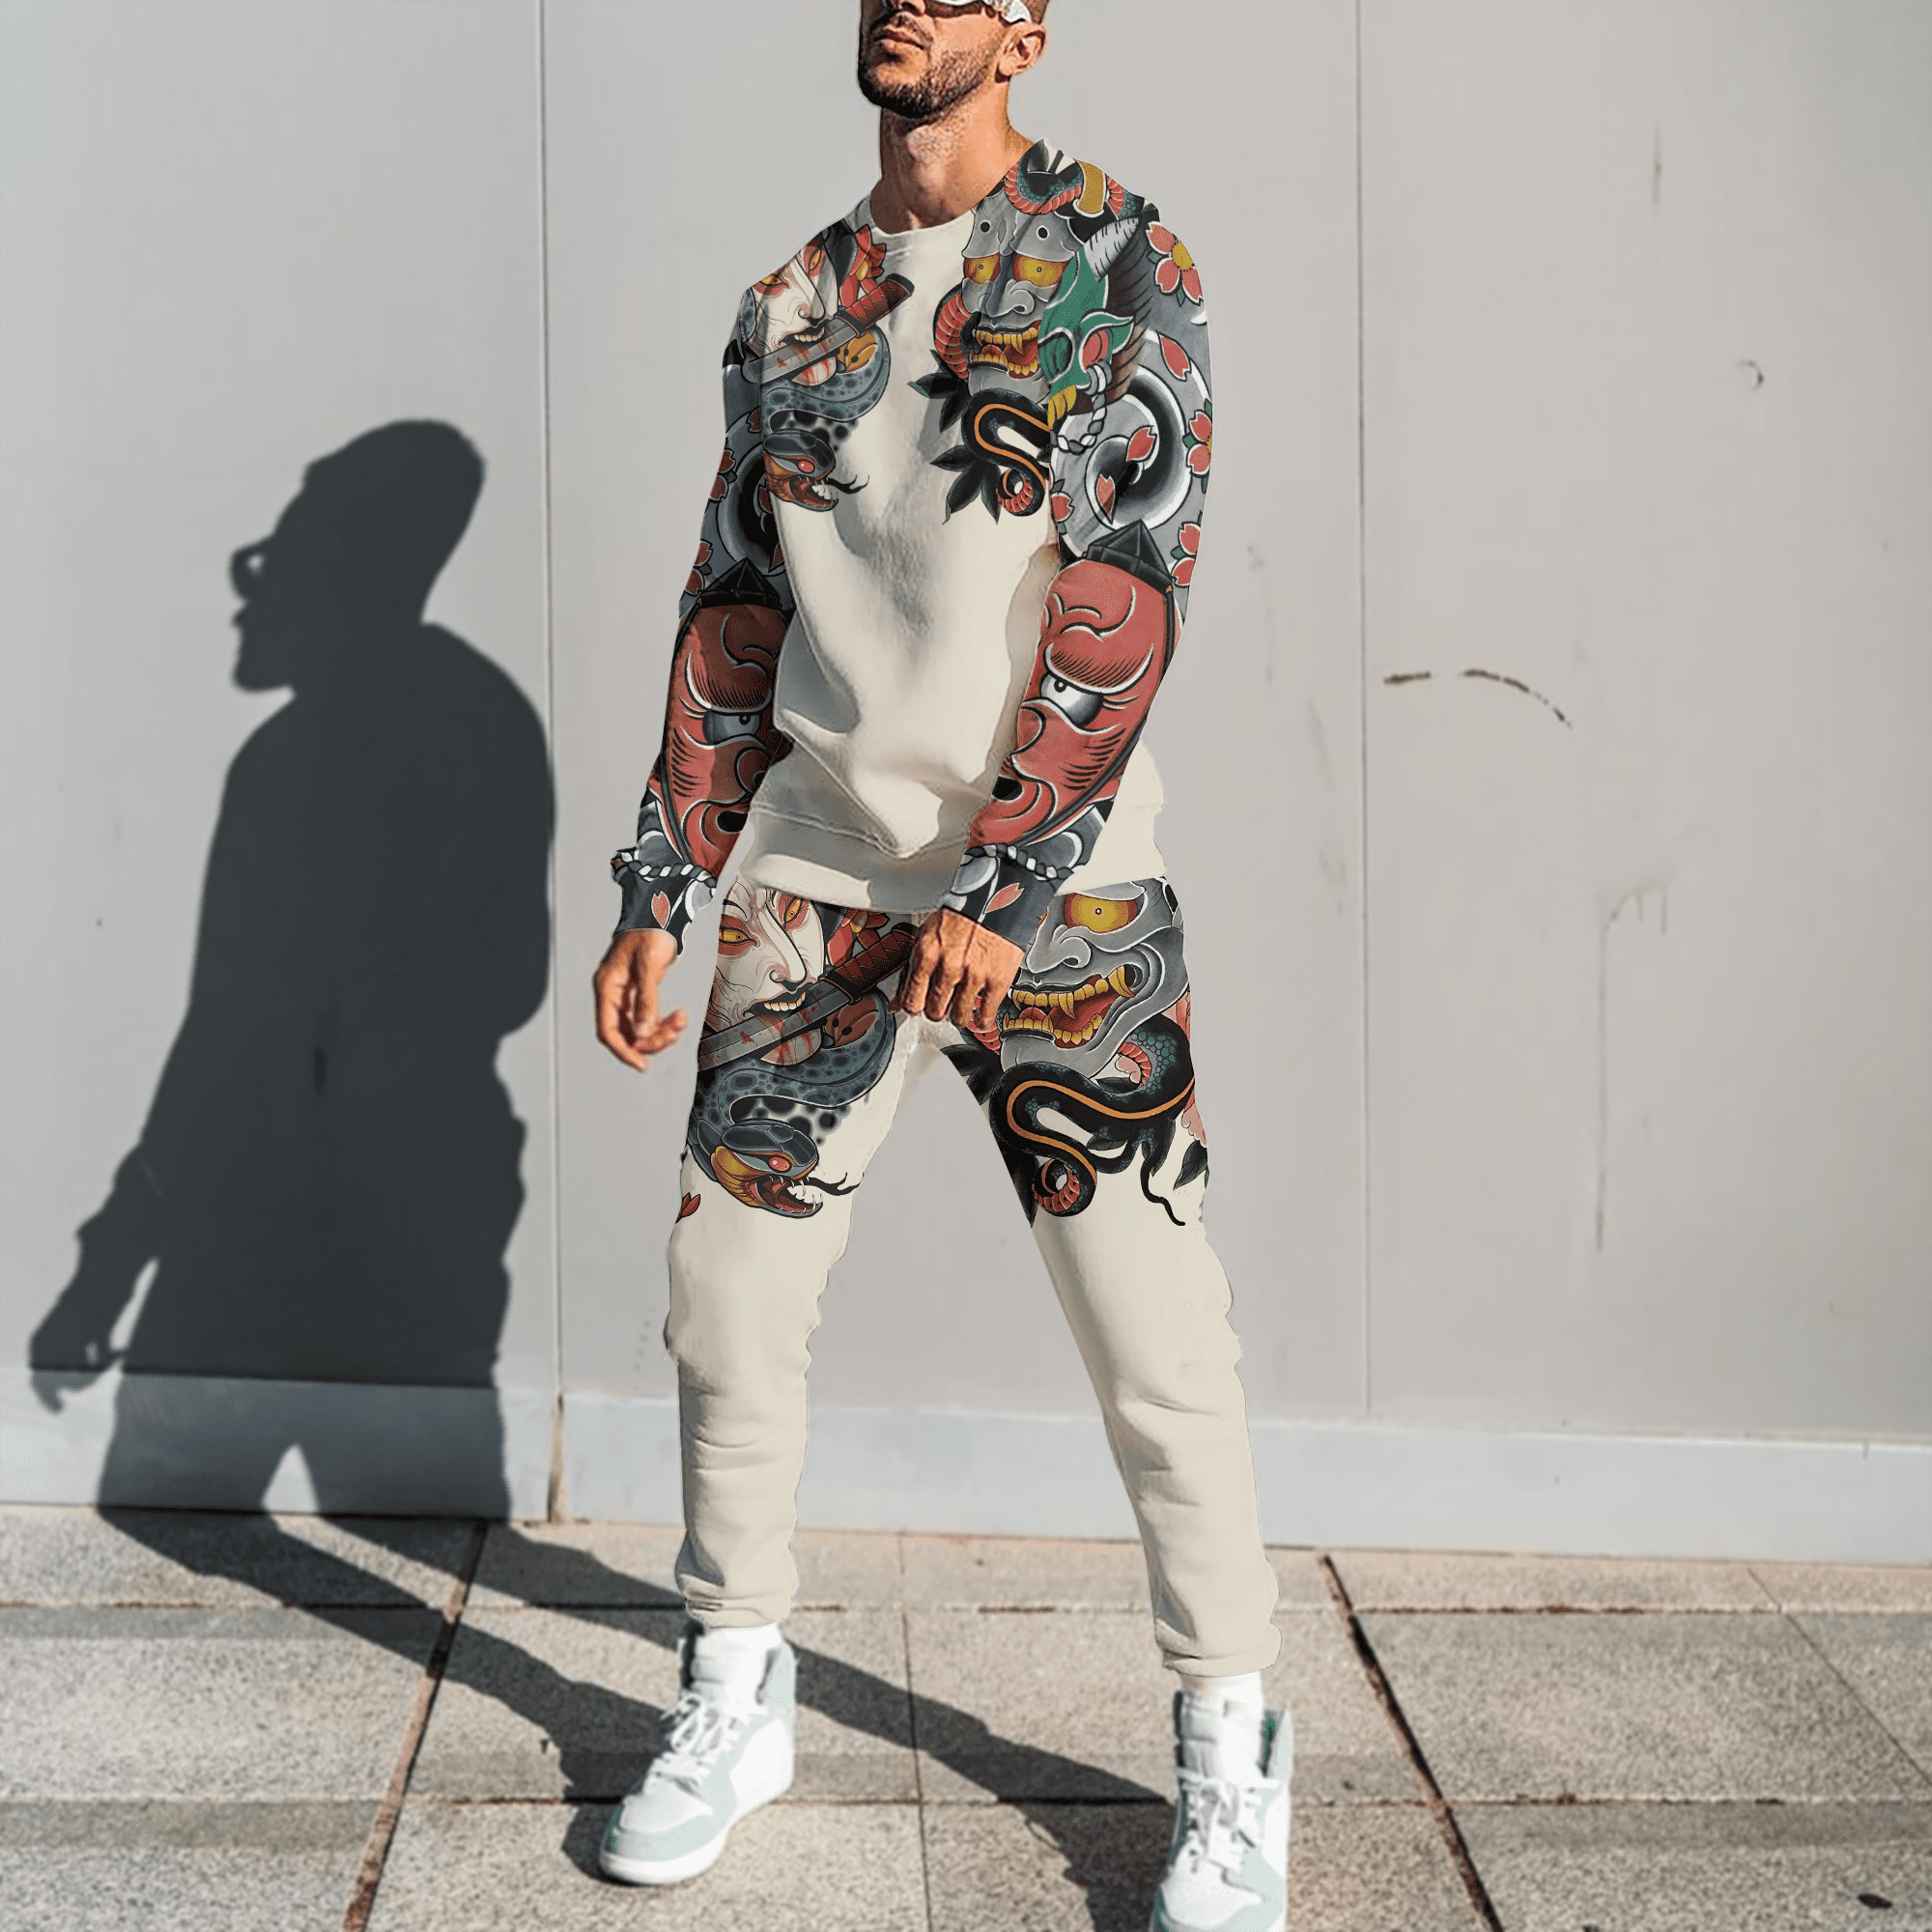 Japan Culture 3D All Over Printed Combo Sweater + Sweatpant